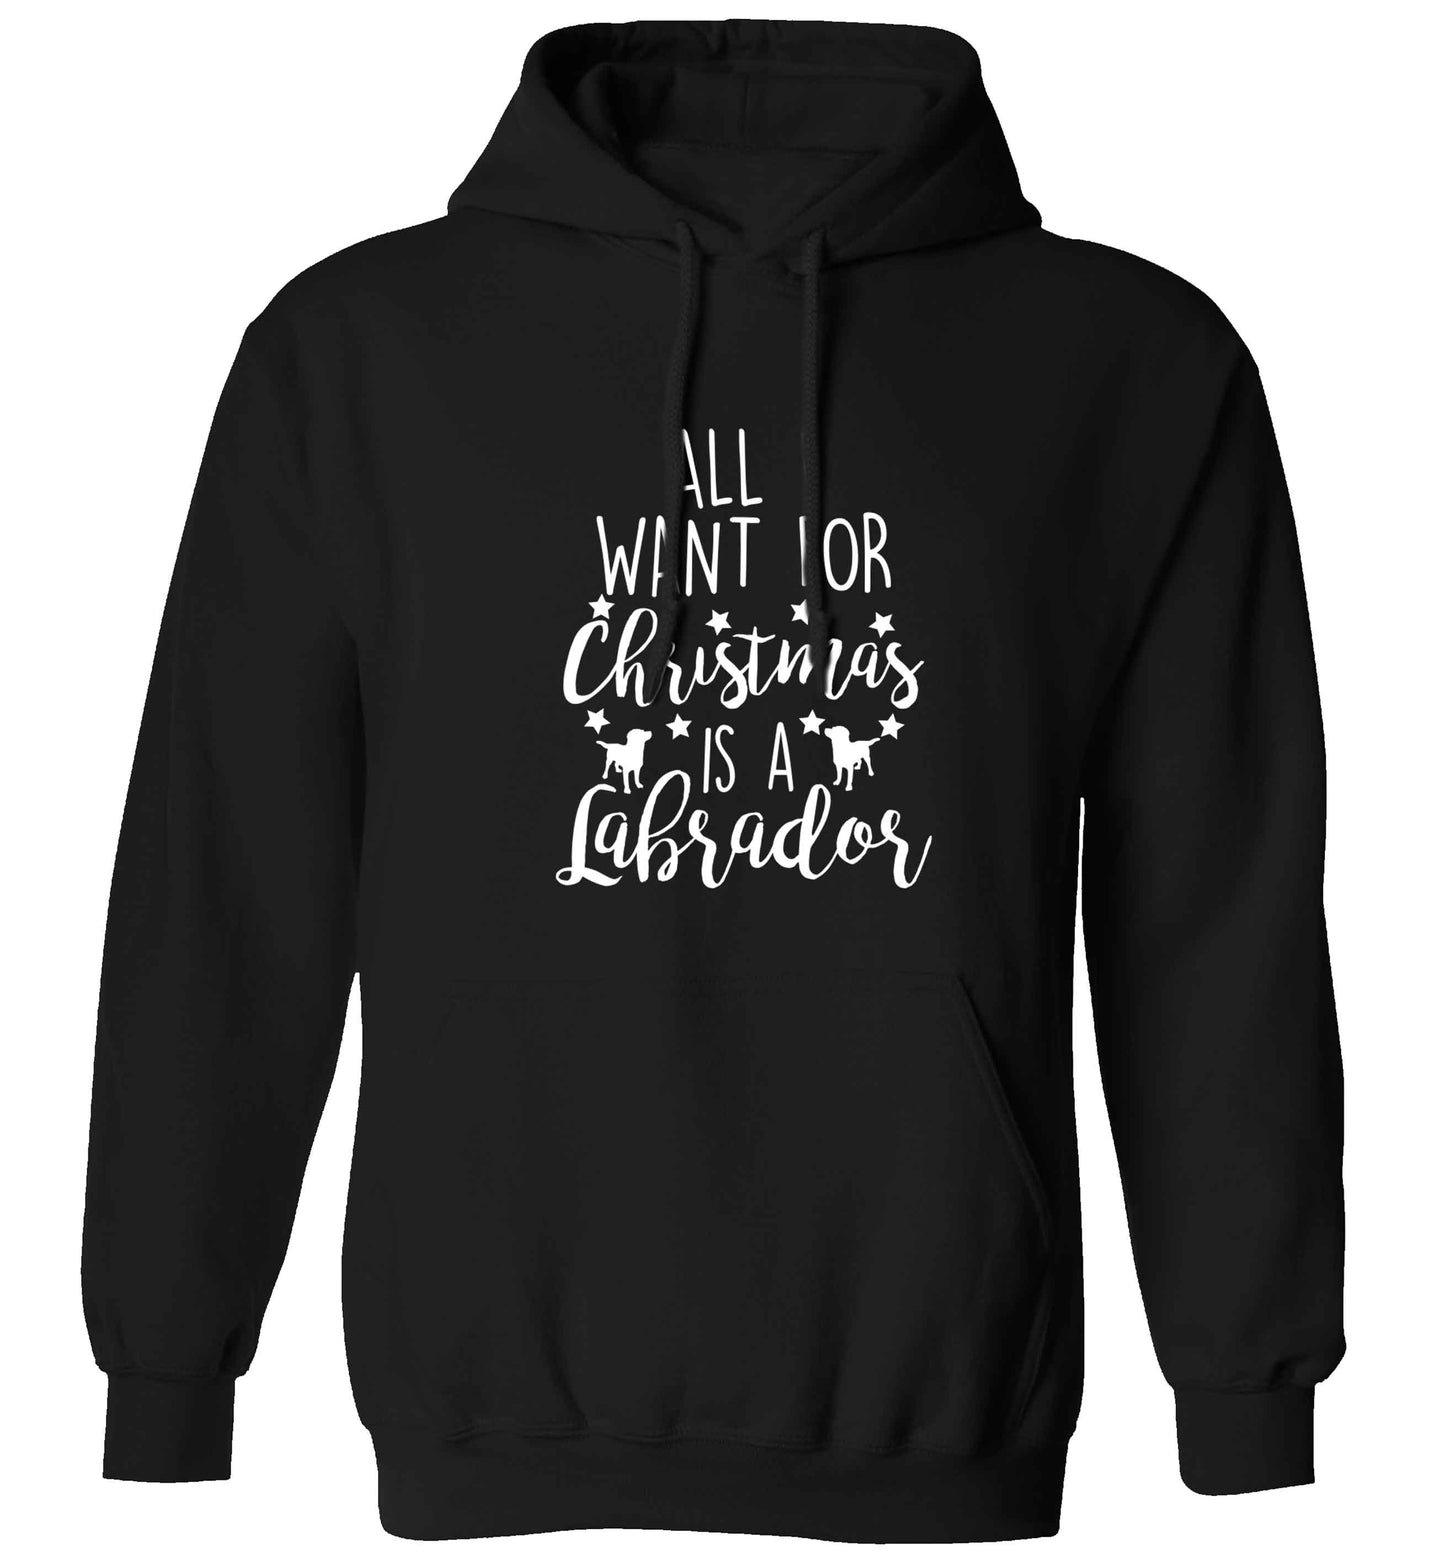 All I want for Christmas is a labrador adults unisex black hoodie 2XL